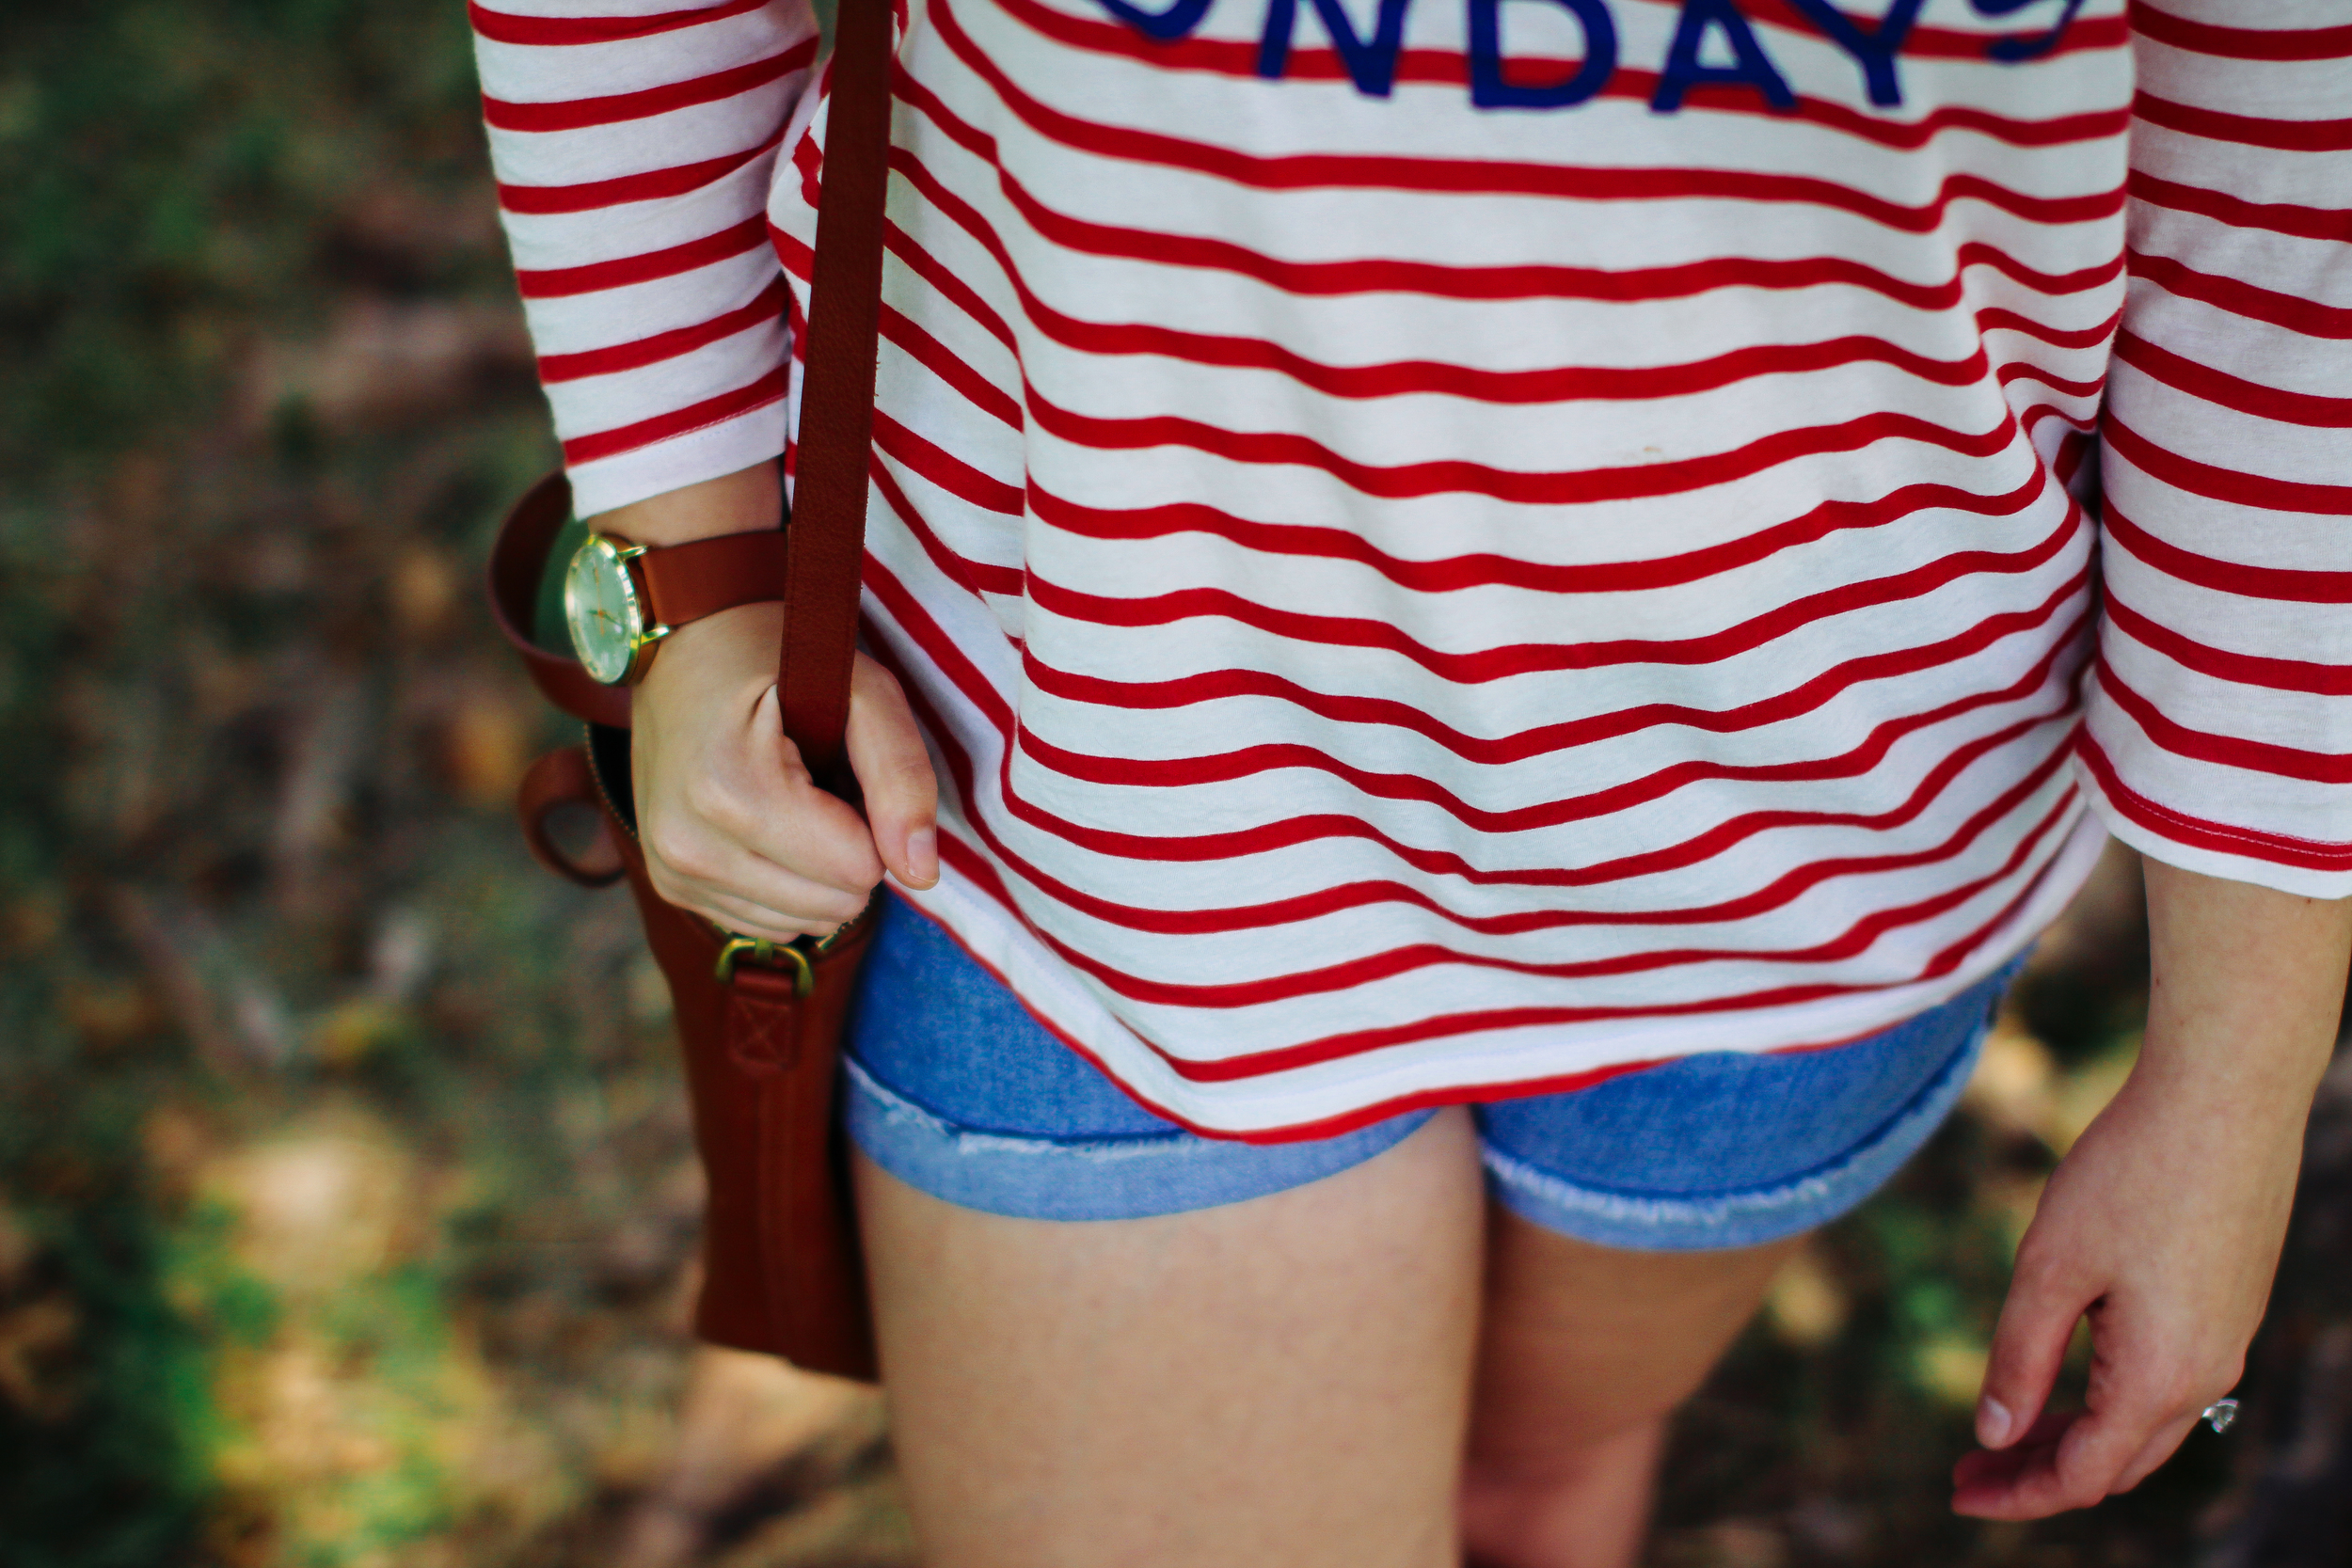 @anthropologie Weekend Tee, @madewell Shorts, @STEVEMADDEN sandals, Memorial Day Sale Round Up via www.chelceytate.com